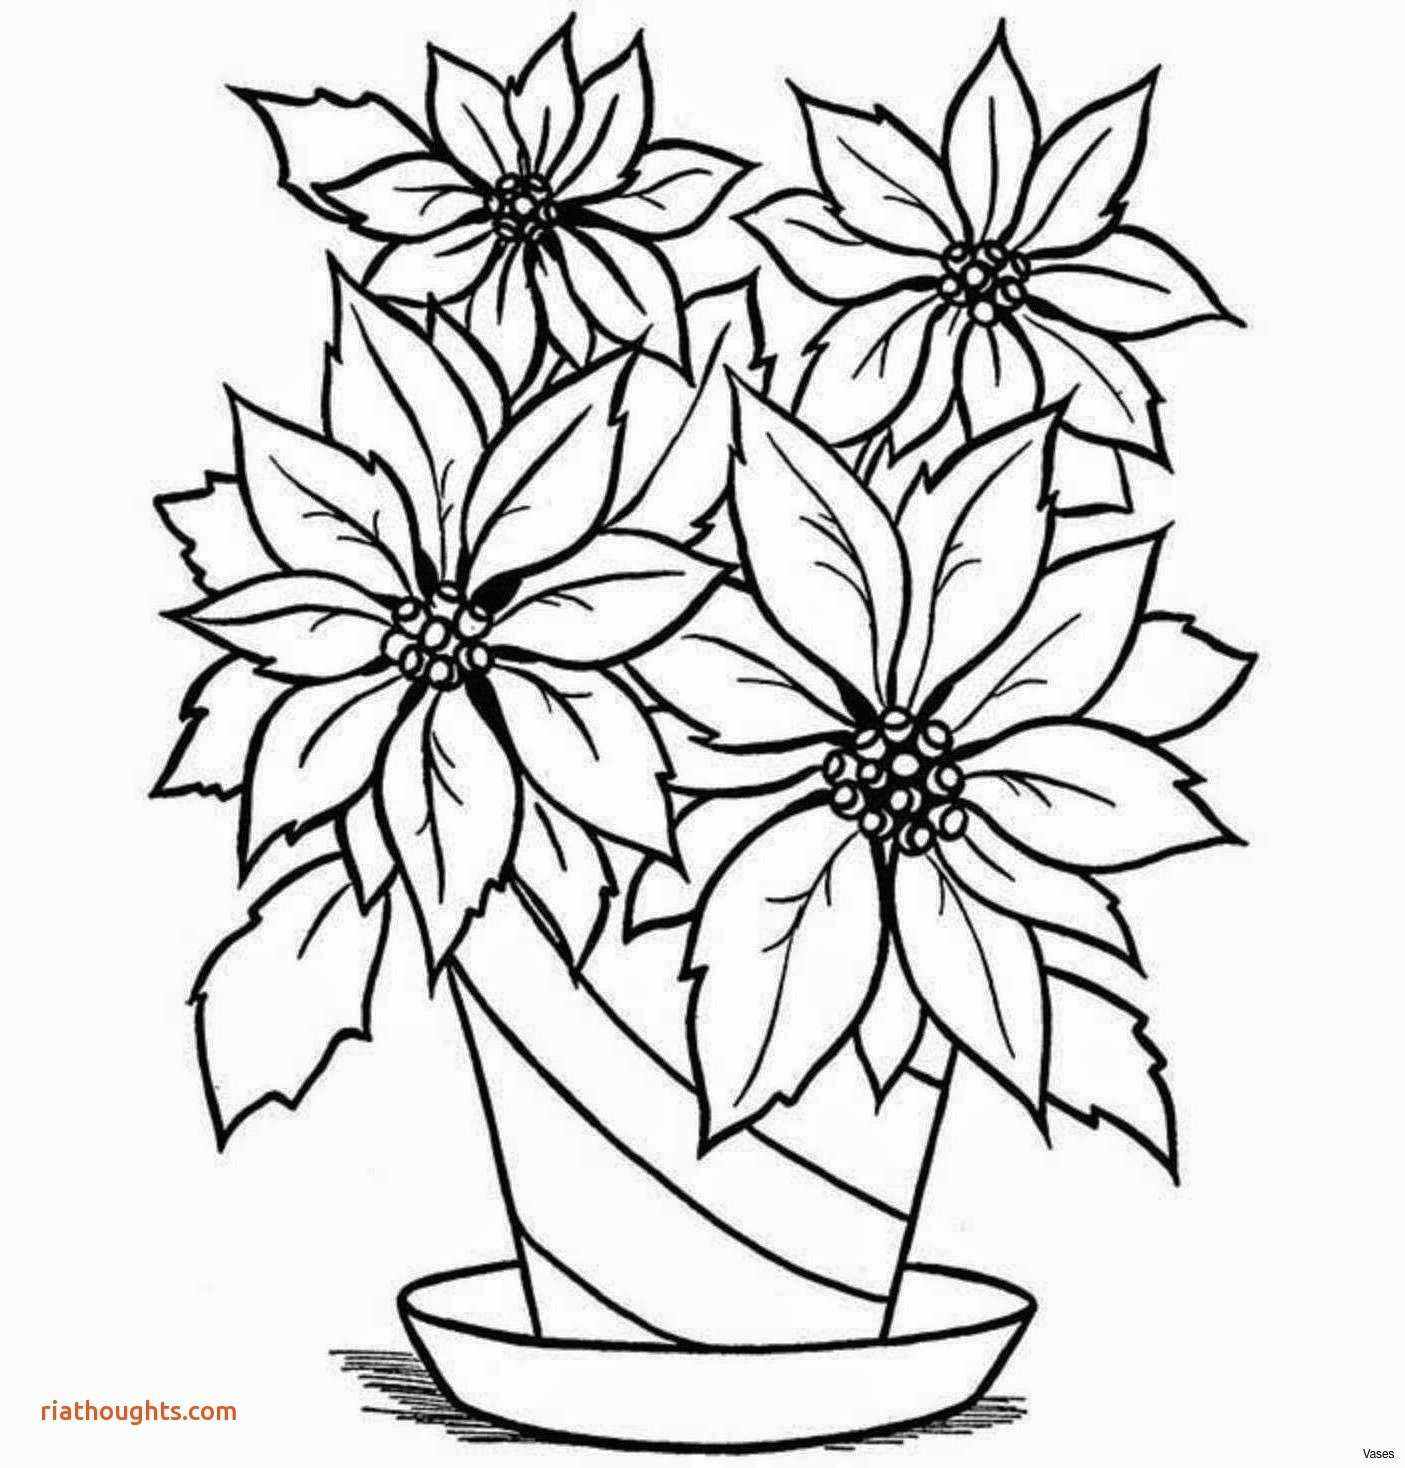 Drawings Of Flowers In Black and White 25 Fancy Draw A Flower Helpsite Us